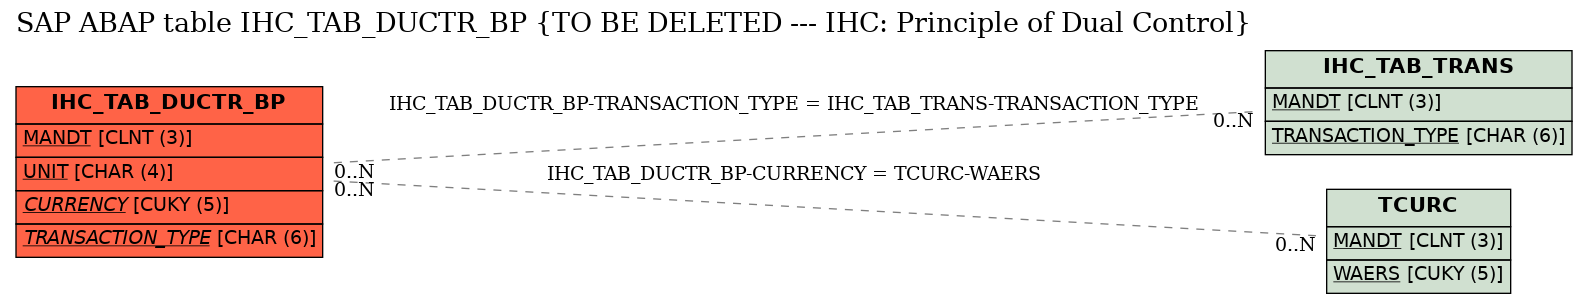 E-R Diagram for table IHC_TAB_DUCTR_BP (TO BE DELETED --- IHC: Principle of Dual Control)